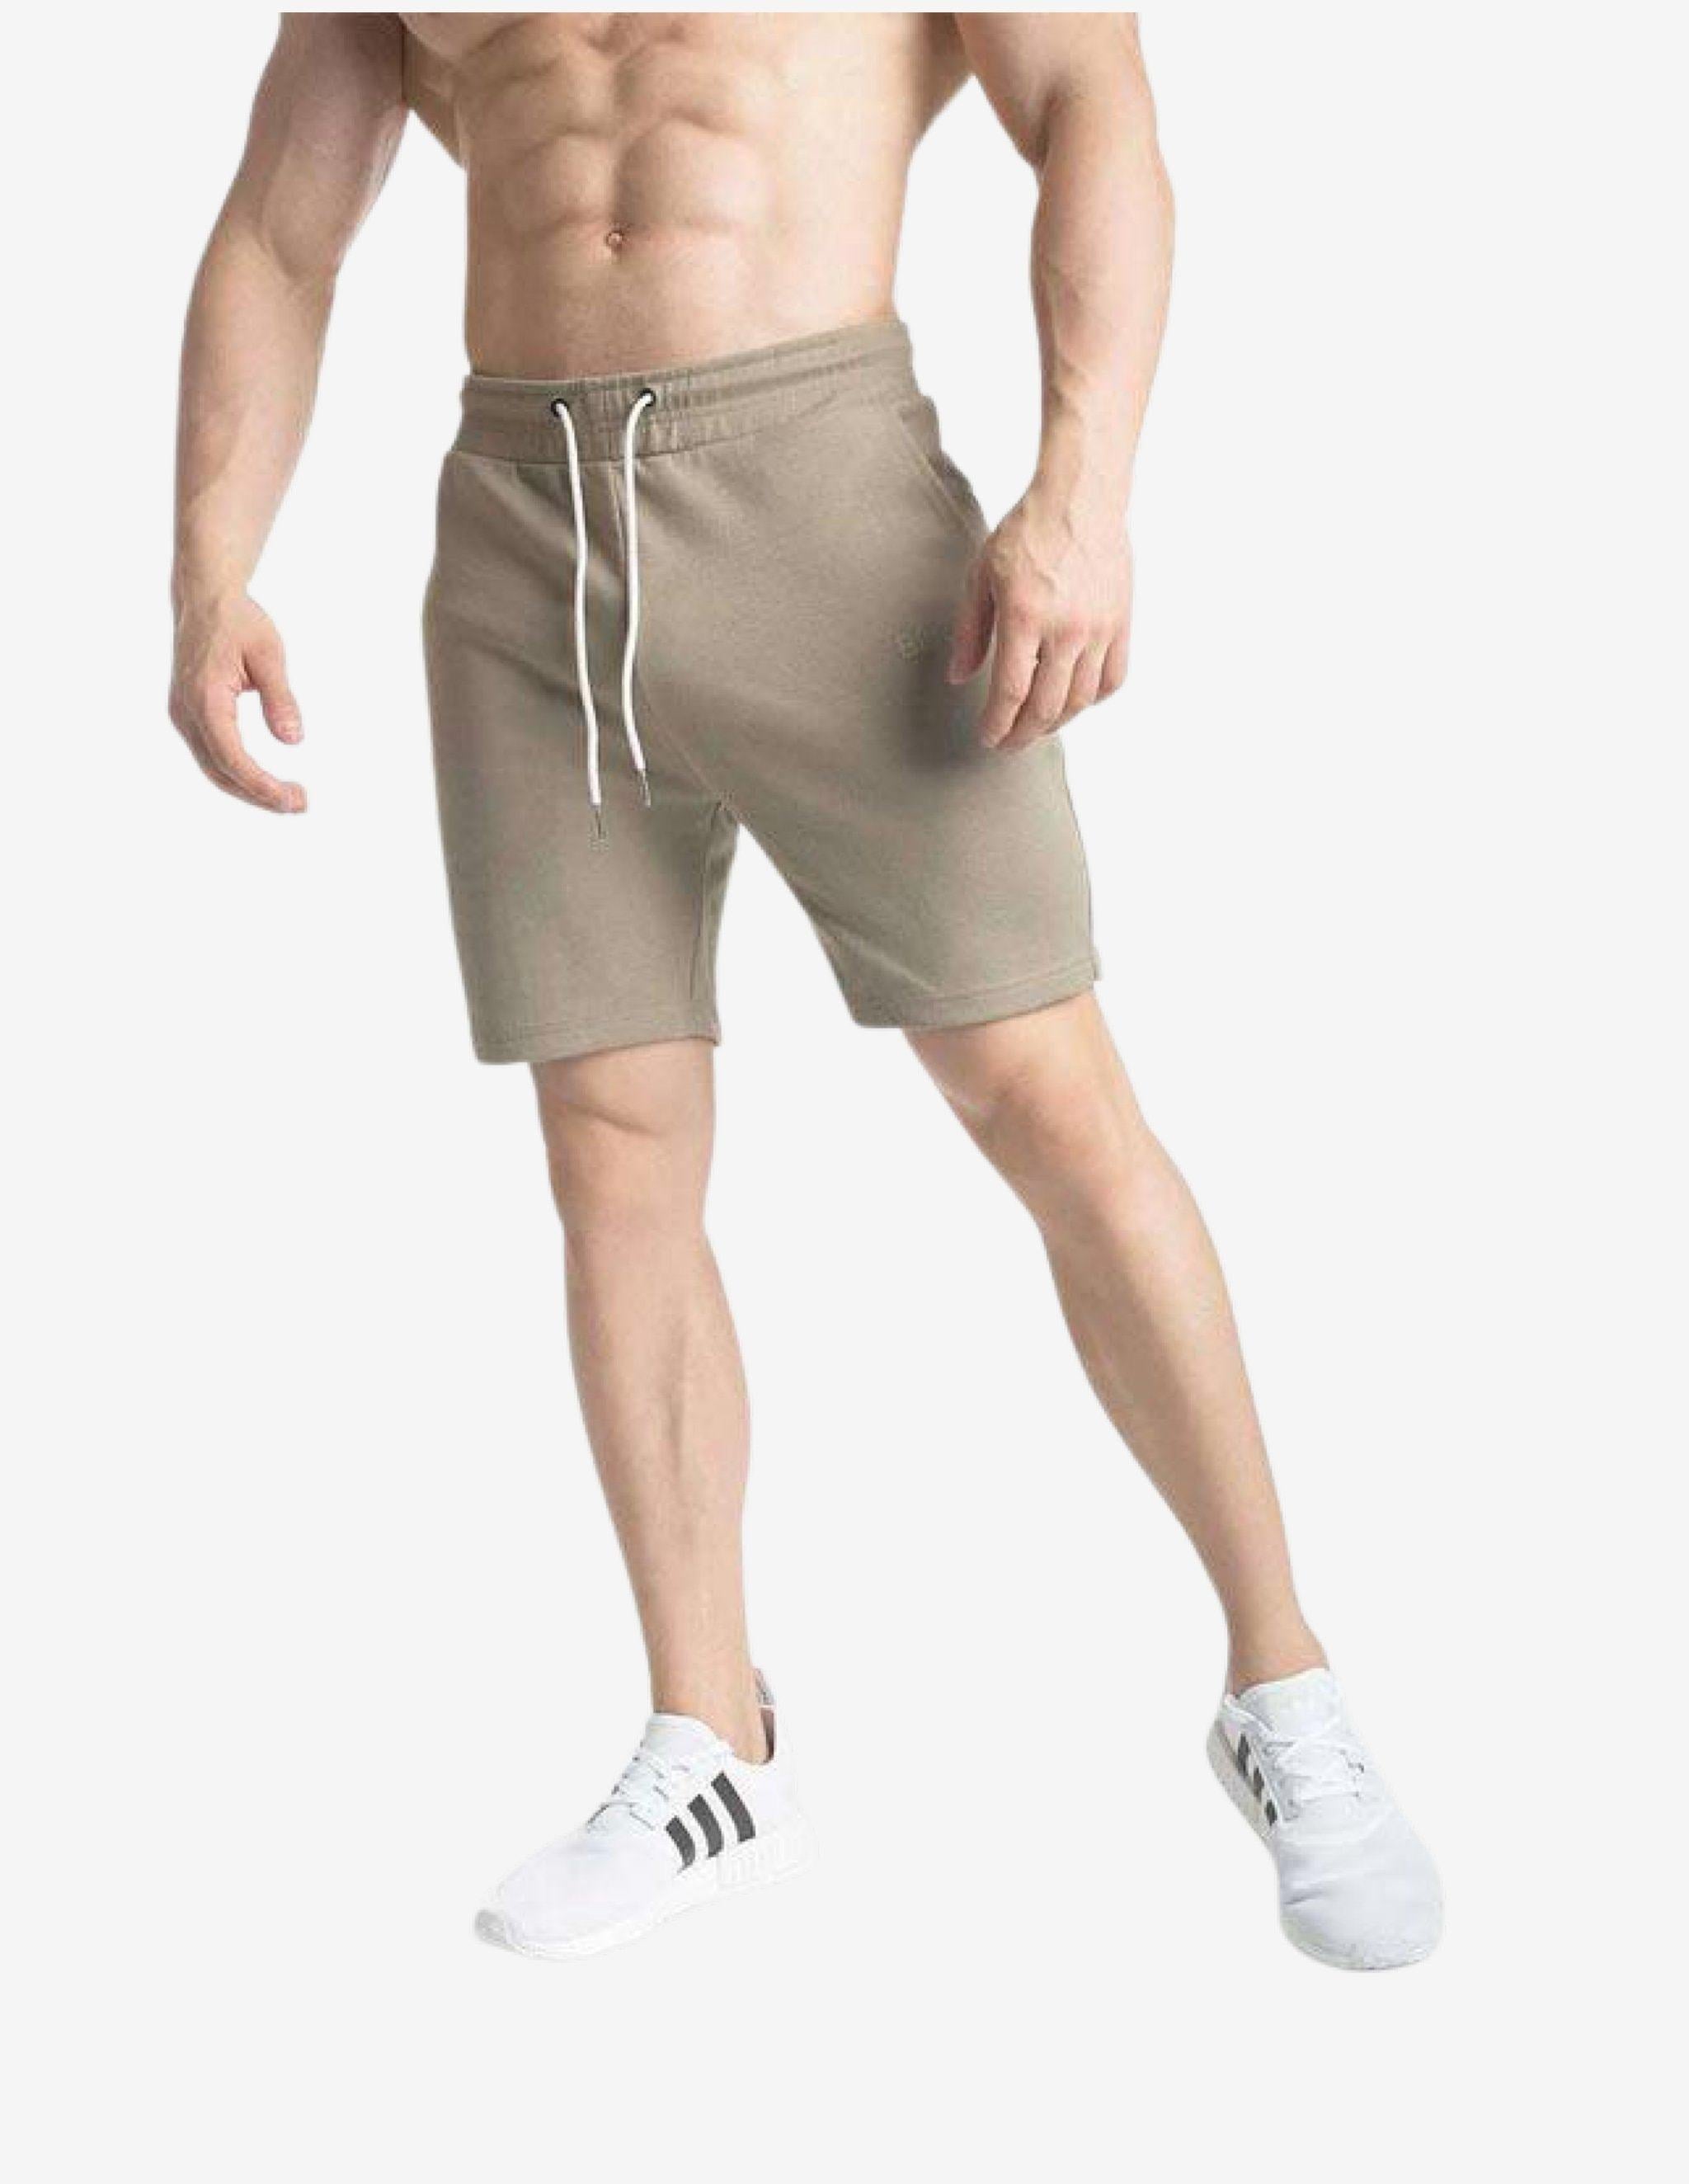 Imperial Fitted V2 Shorts - Moss-Shorts Man-Biink Athleisure-Guru Muscle